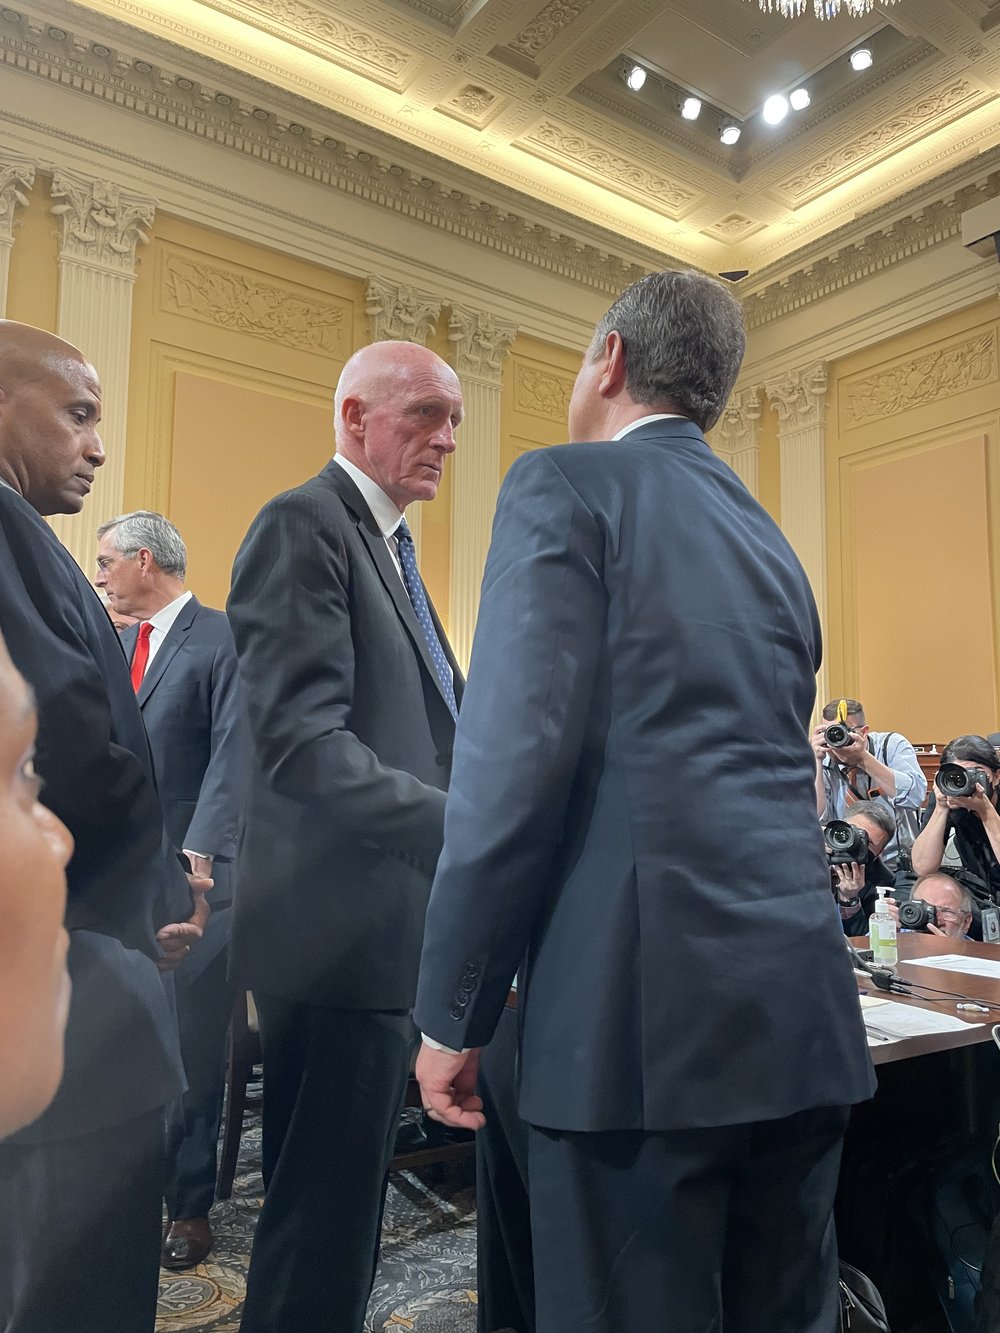 Rusty Bowers shakes hands with Rep. Adam Schiff at January 6th hearing